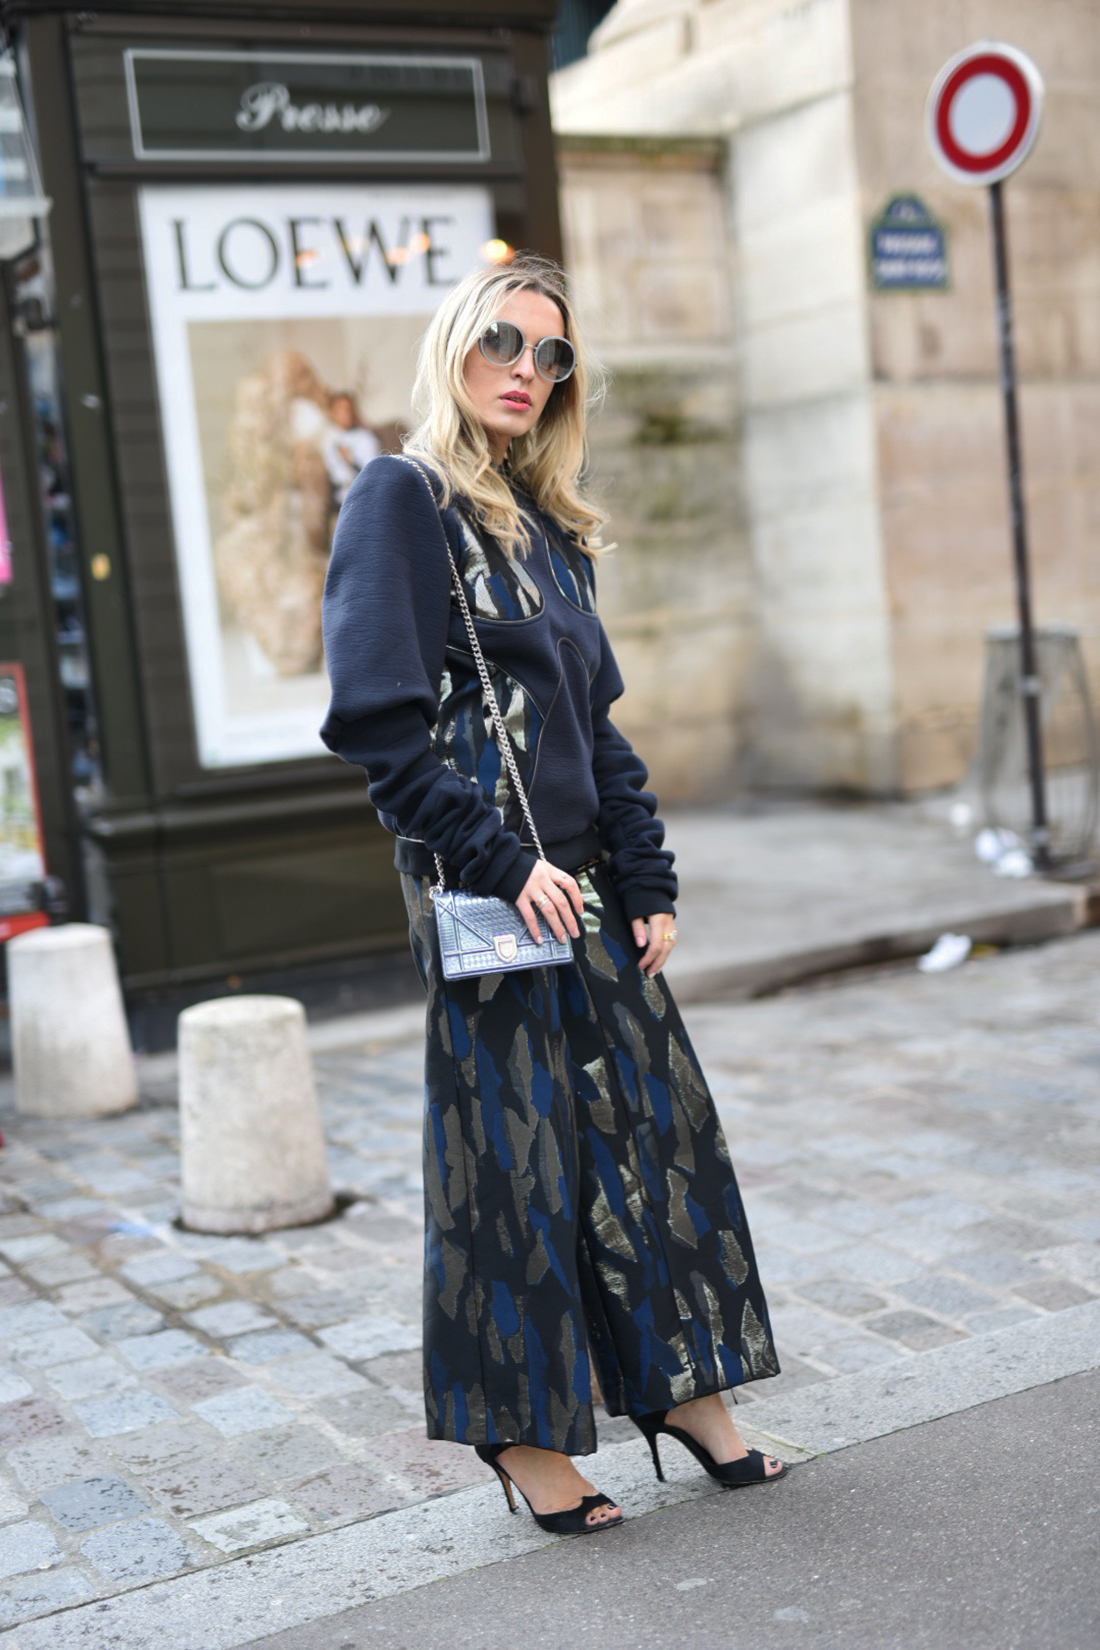 PFW16 - DAY 3 SECOND LOOK